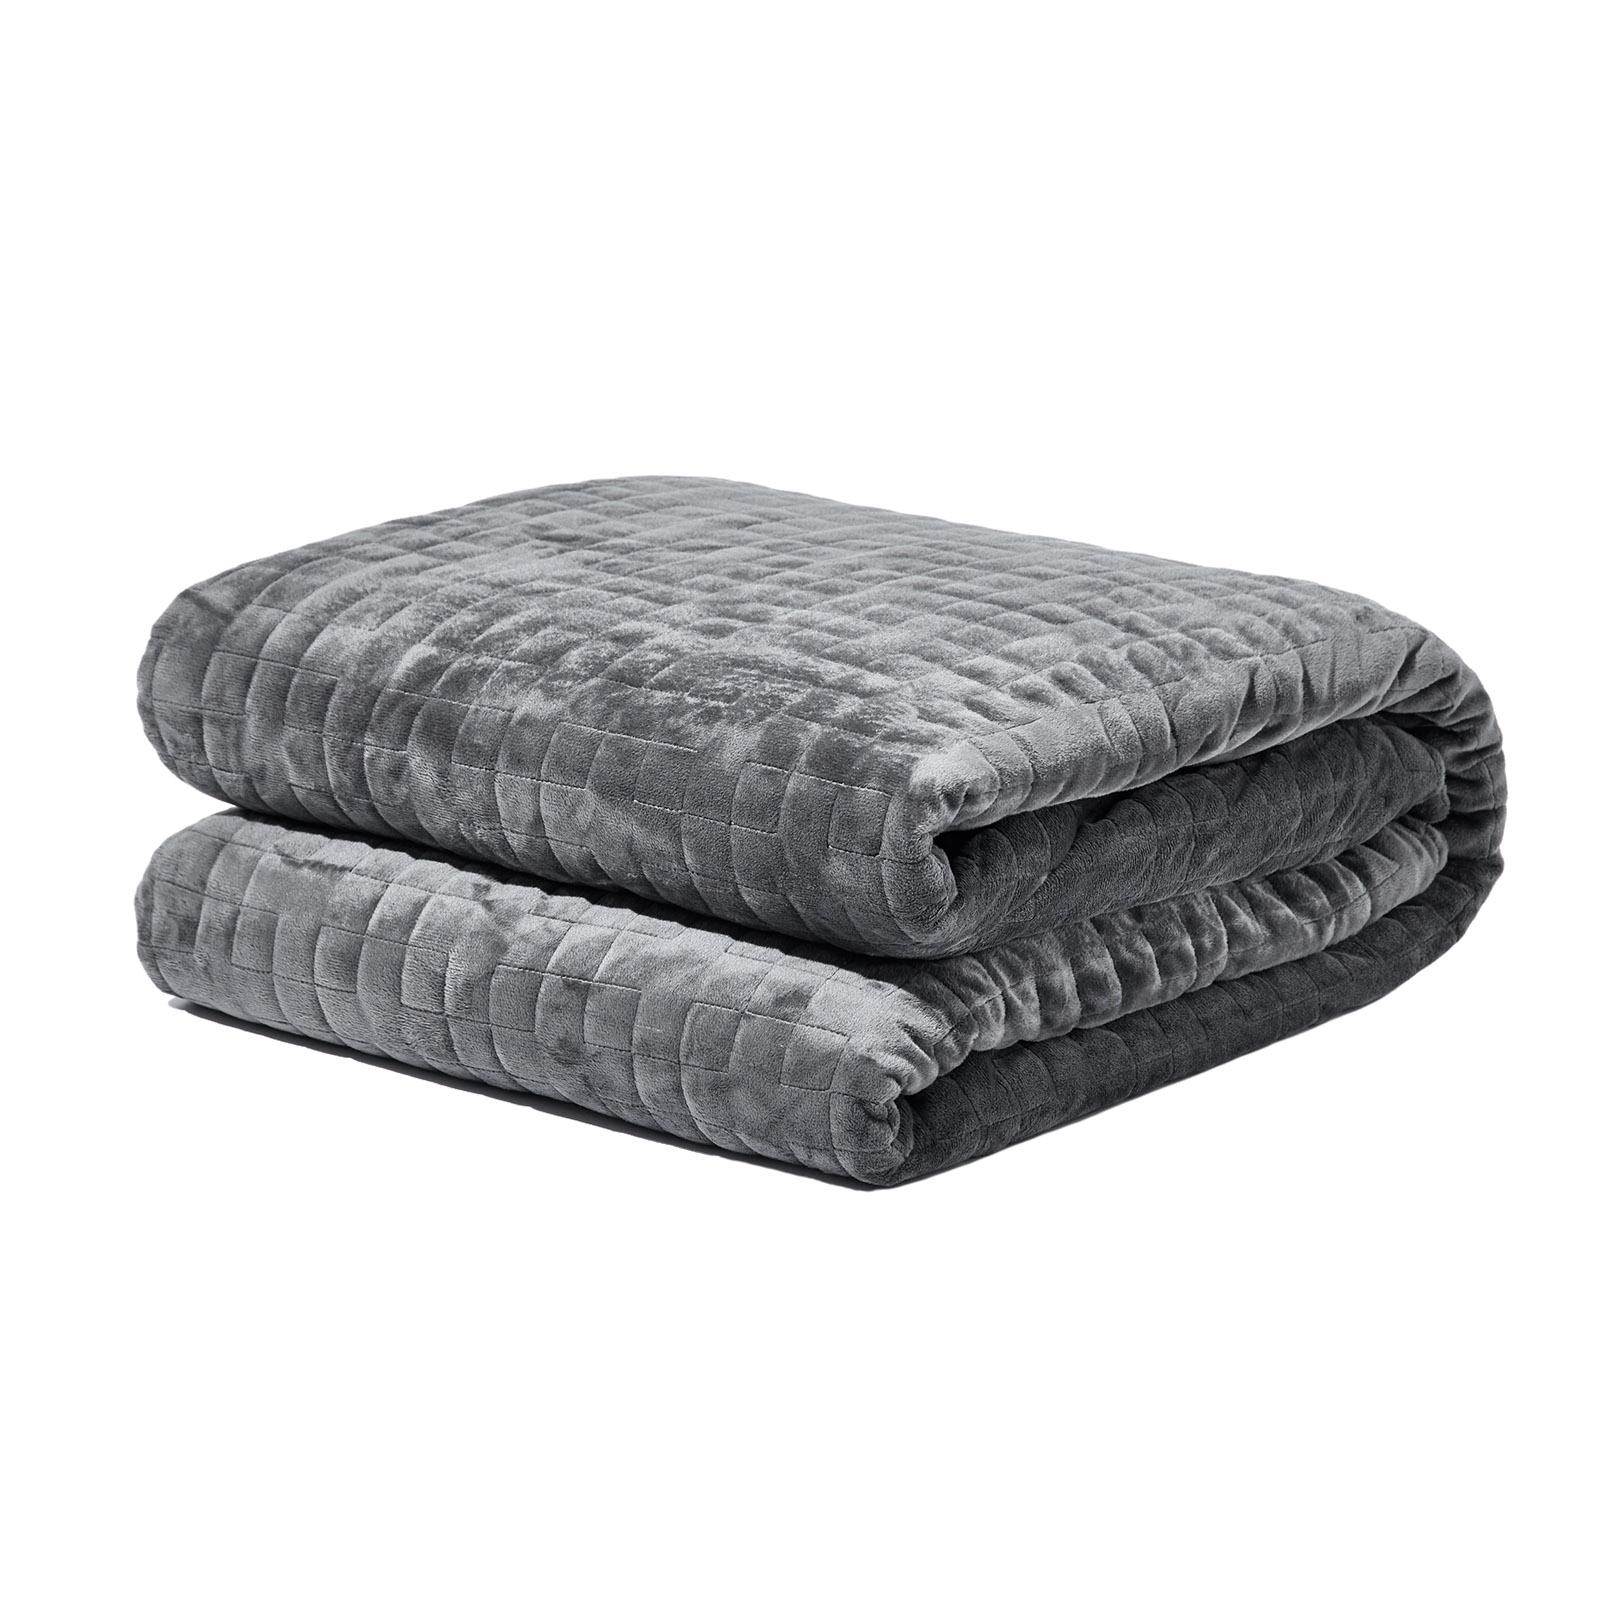 Weighted Blanket 20 lb 72" x 48" Grey by Gravity Products image01